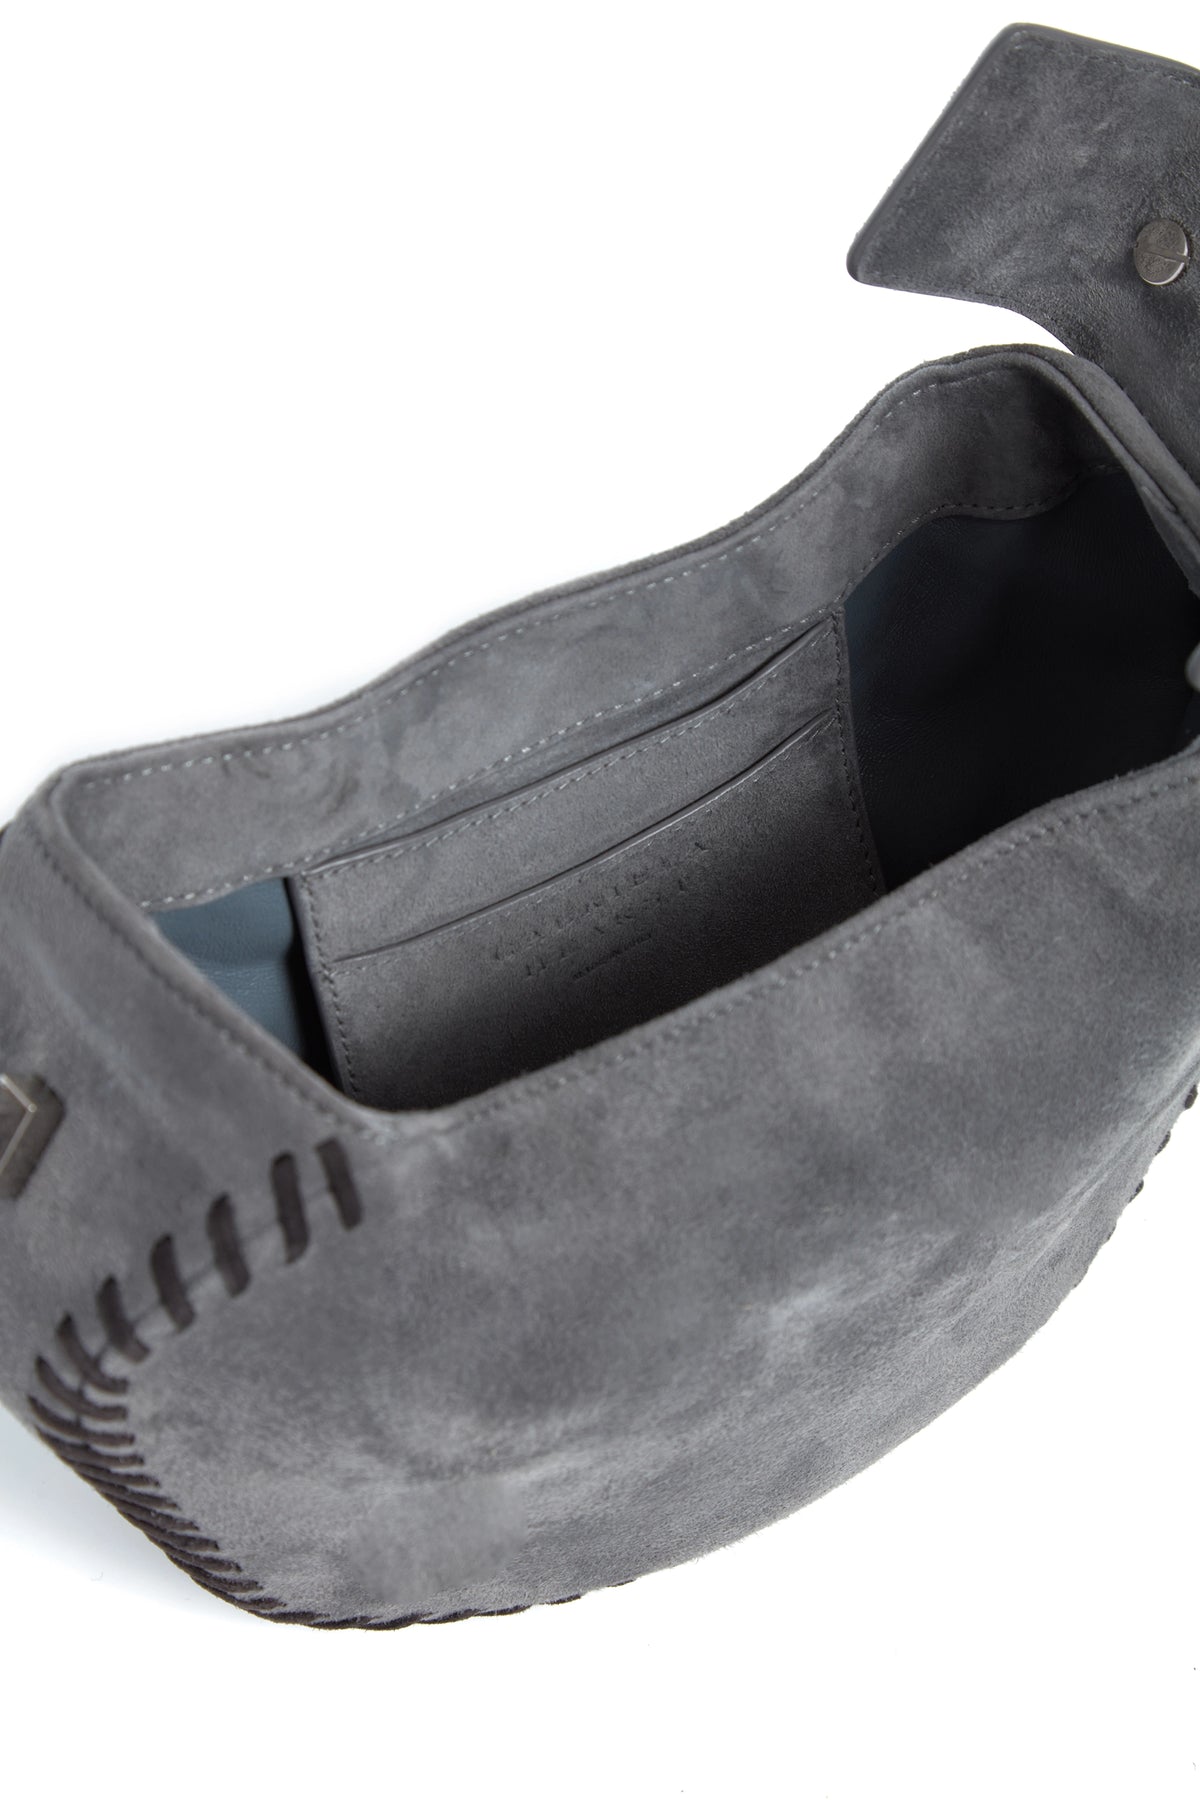 Whipstitch Demi Bag in Charcoal Suede